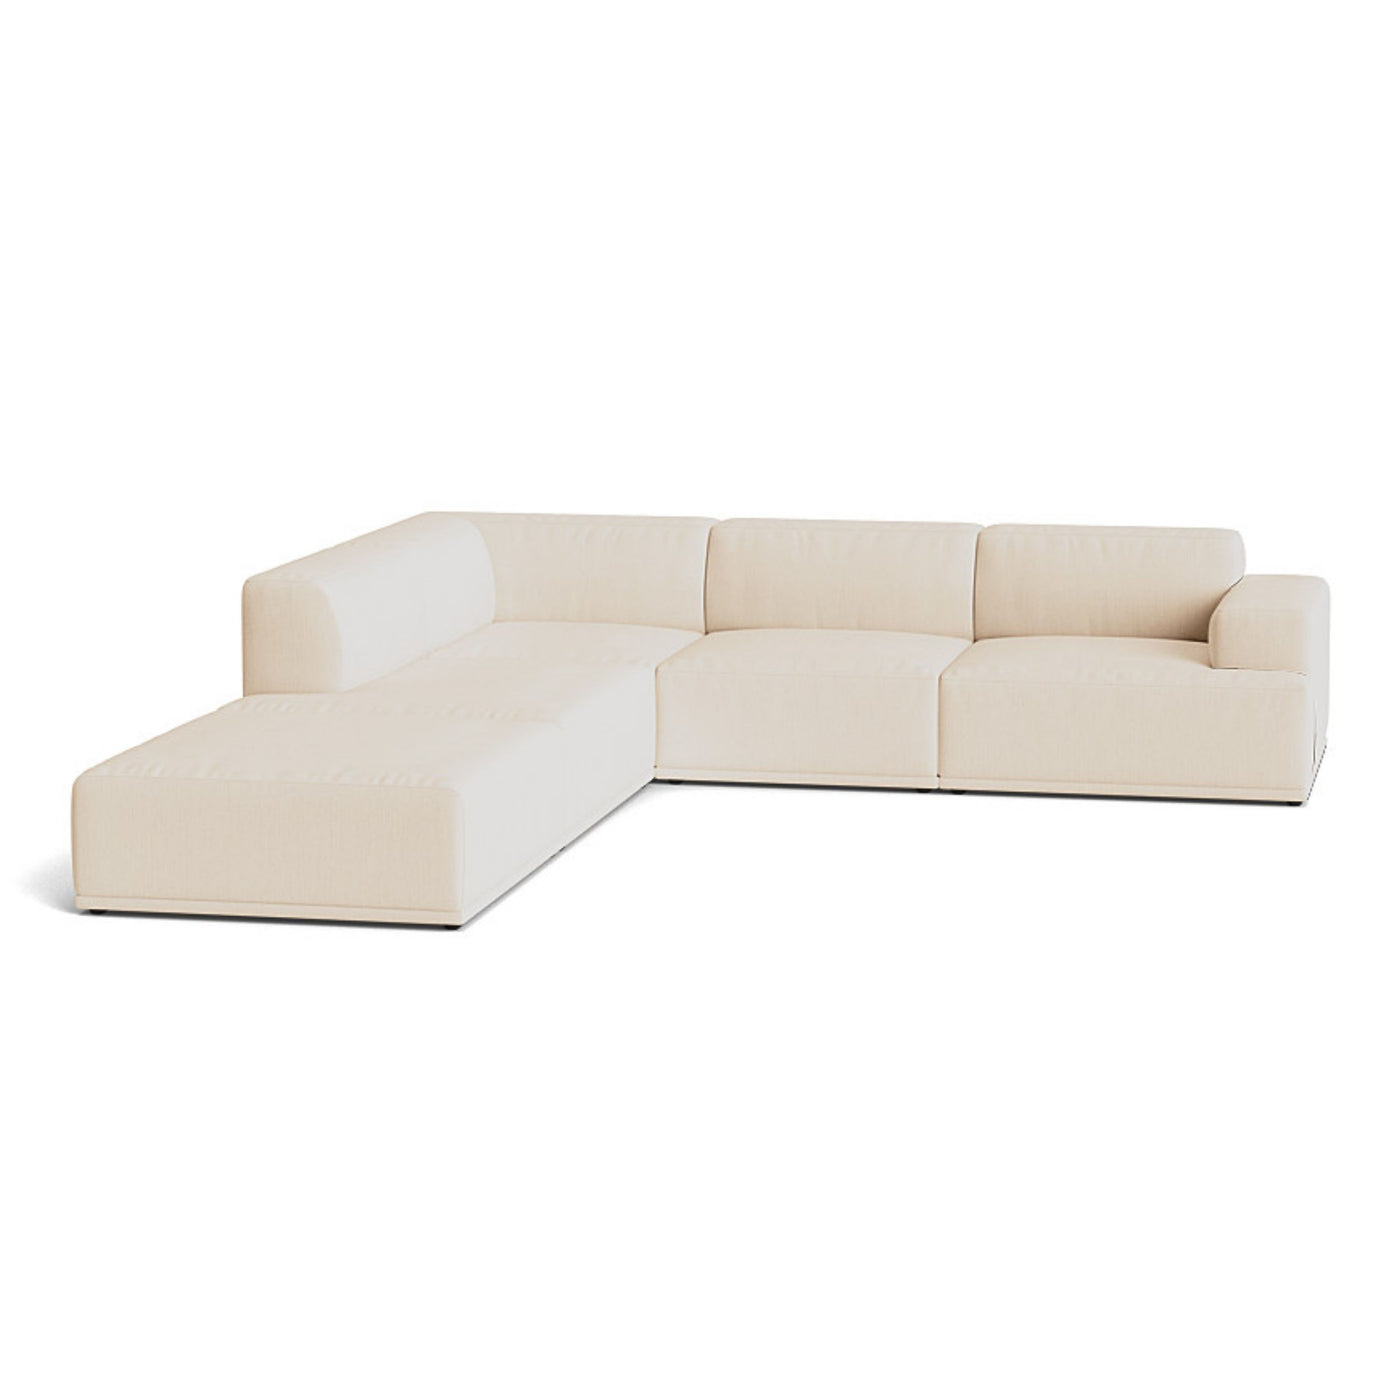 Muuto Connect Soft Modular Corner Sofa, configuration 1. Made-to-order from someday designs. #colour_balder-612